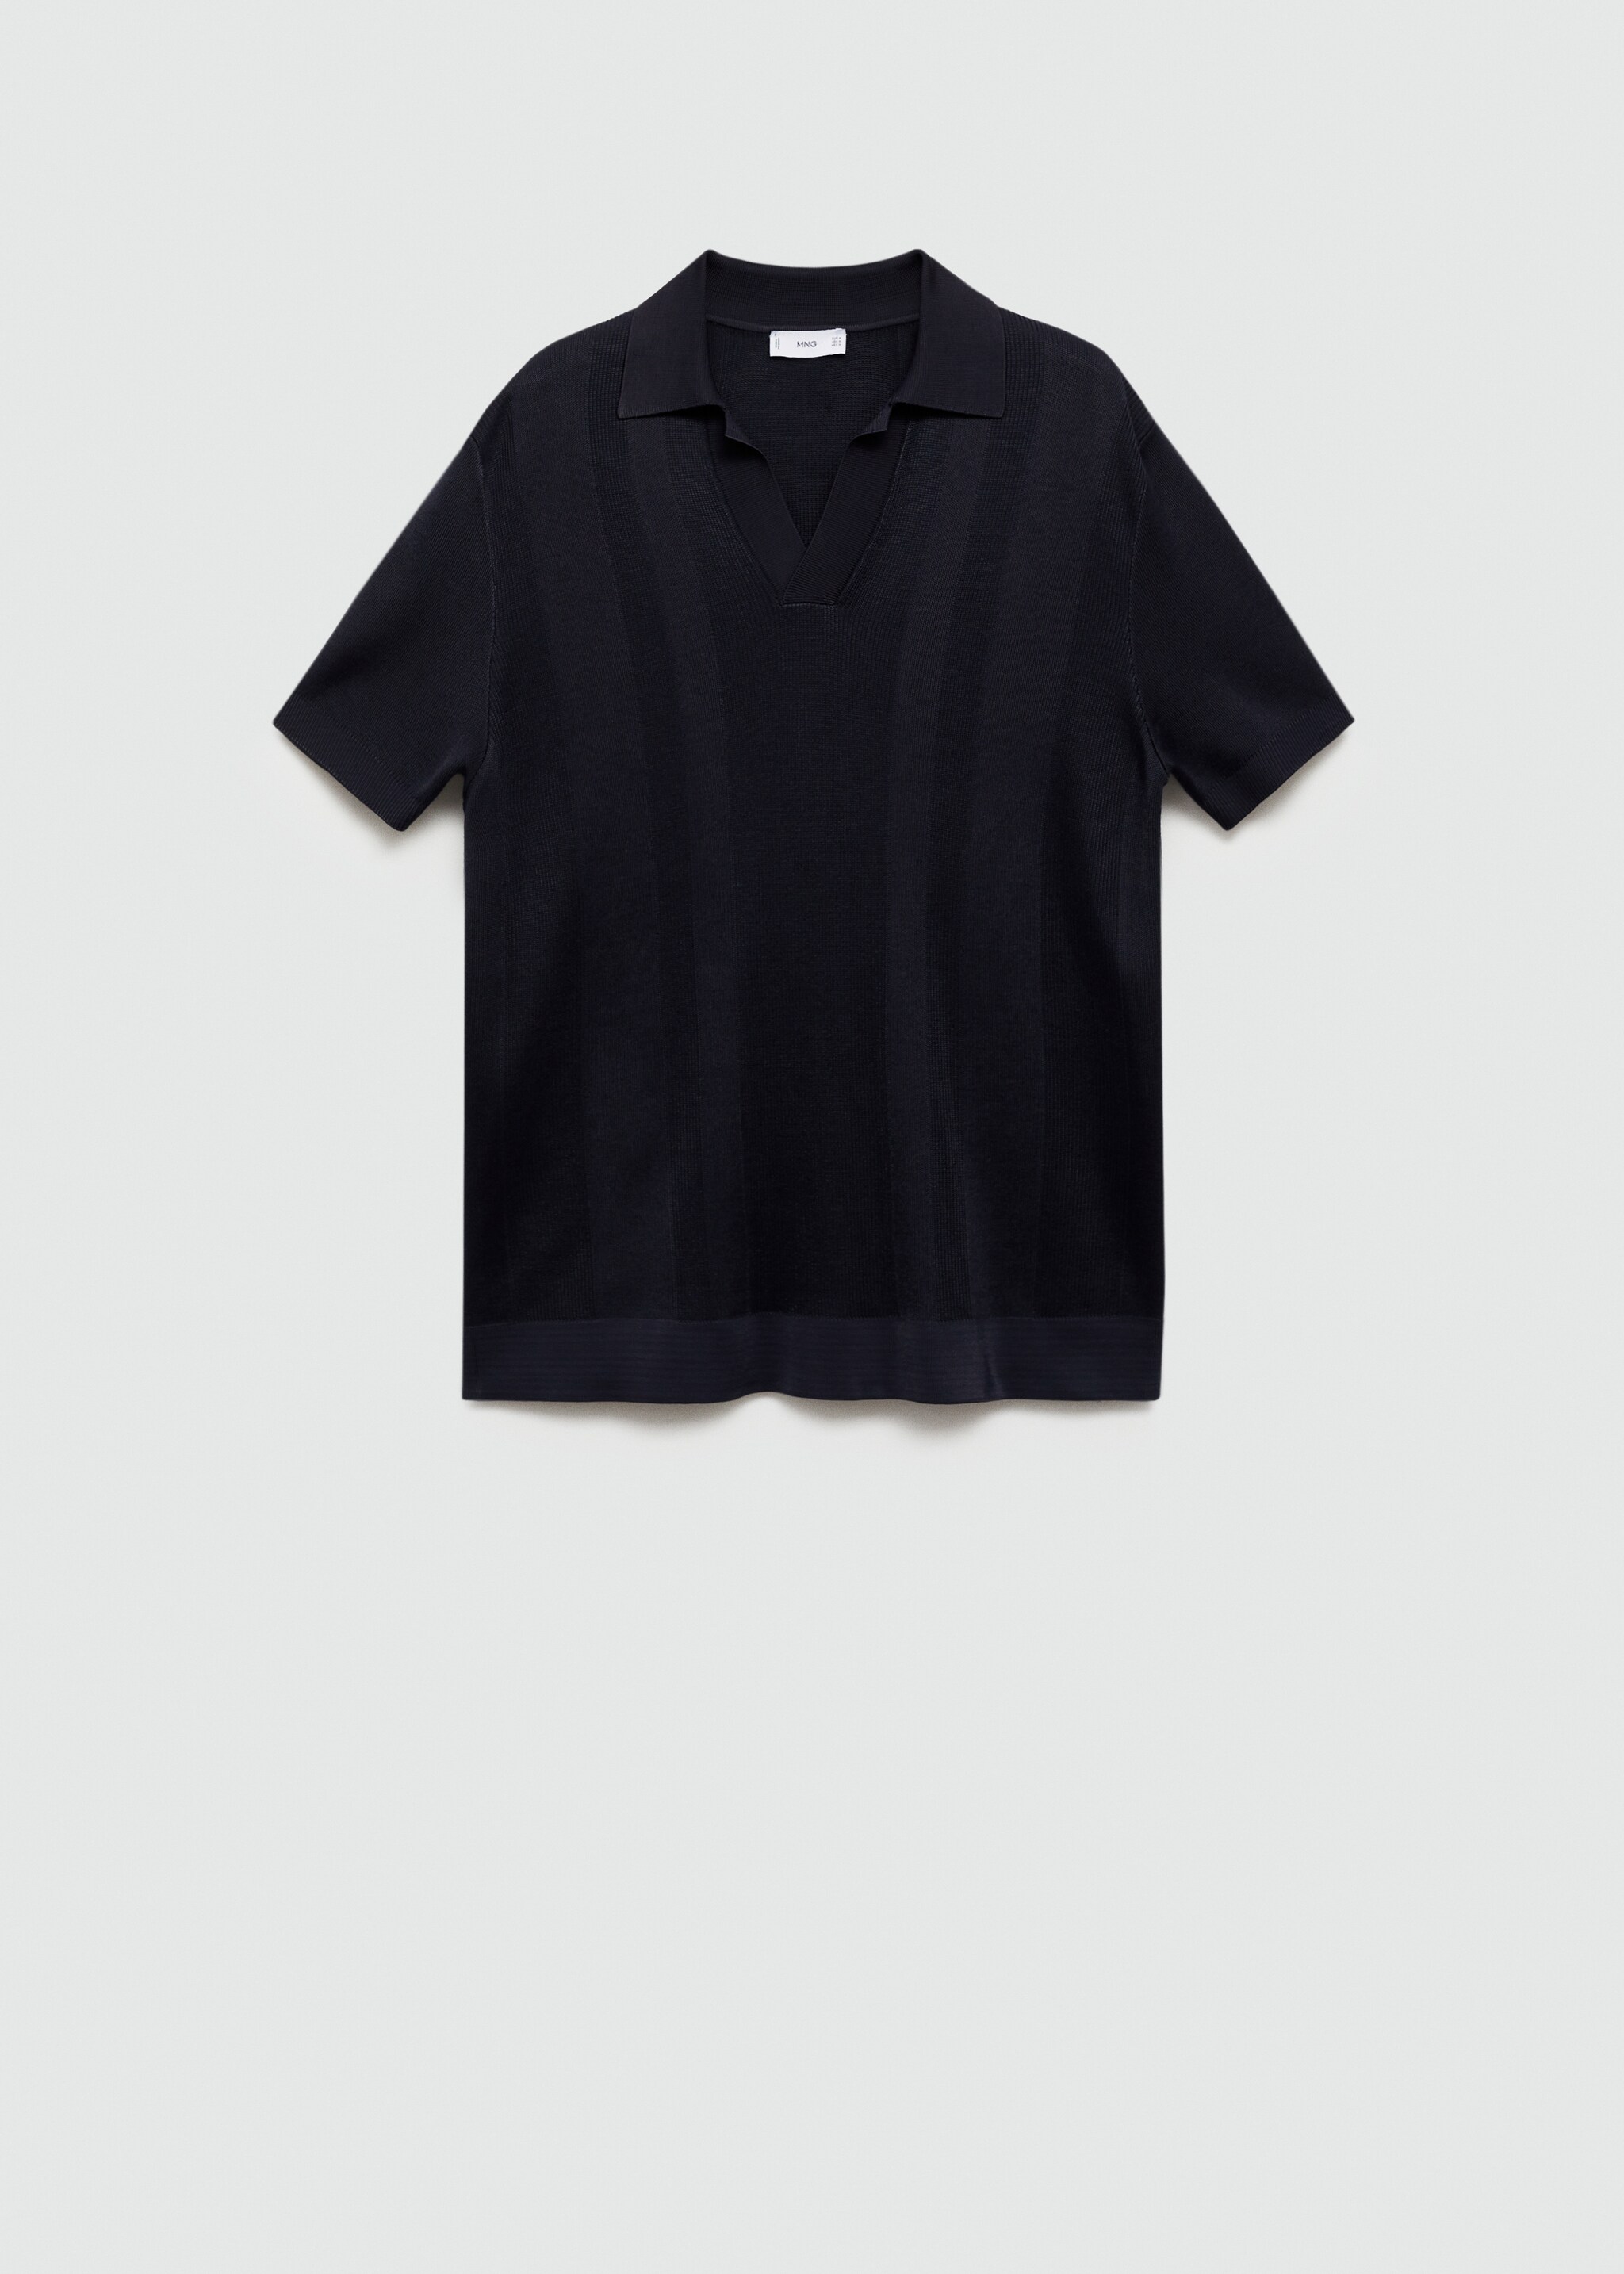 Ribbed knit polo shirt - Article without model